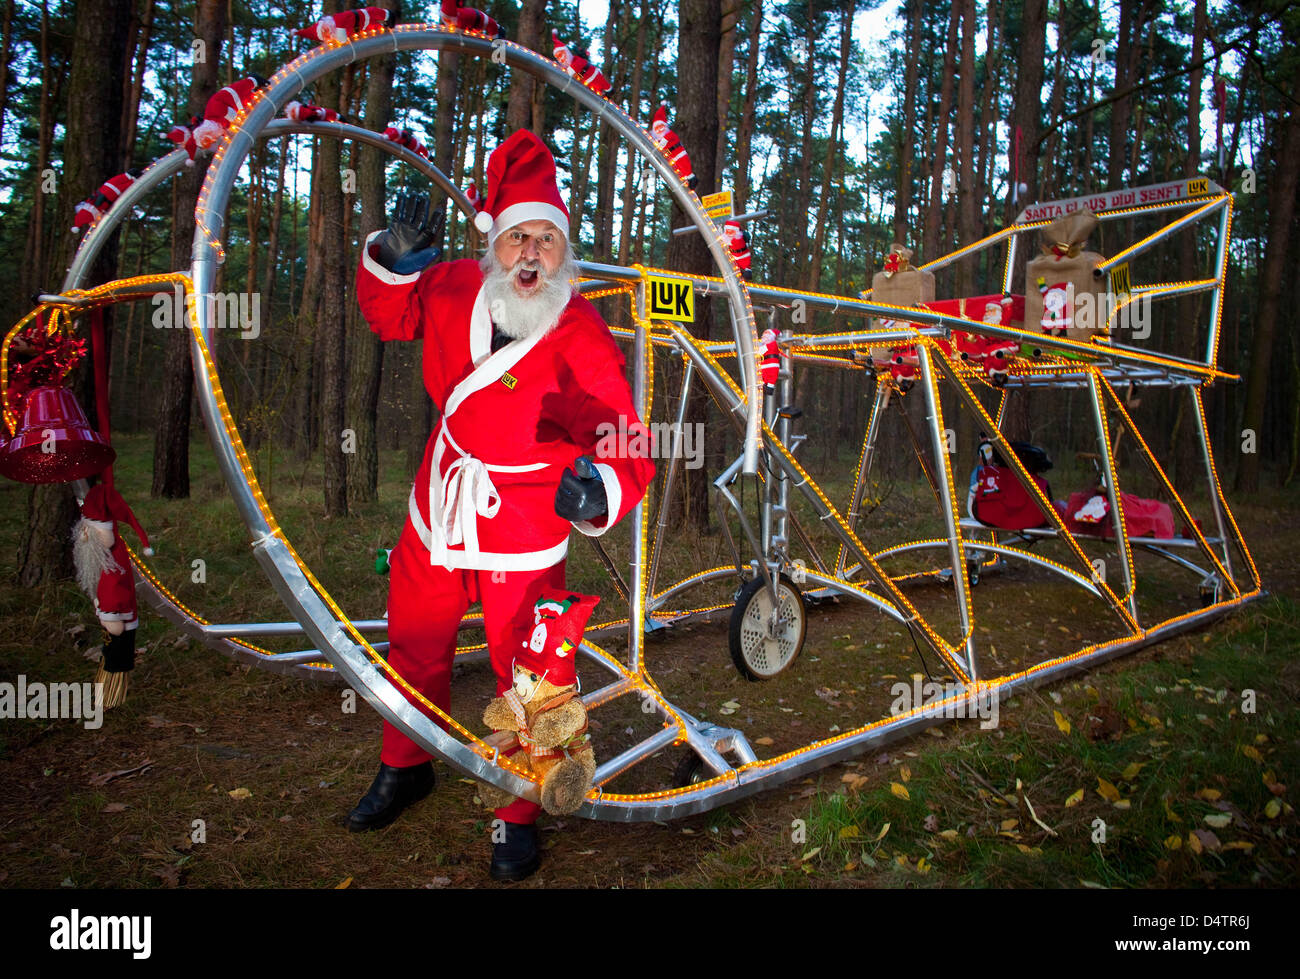 German action artist and bicycle designer Dieter 'Didi' Senft poses in a Santa Claus costume with his latest invention in Storkow, Germany, 24 November 2009. The new bike measures 7.30 metres length, 3.10 metres heigth, 2.00 metres width, weighs 800 kilograms and is illuminated with 3,000 light bulbs. As always, the invention is fully ridable. Senft has yet invented more than 200 u Stock Photo